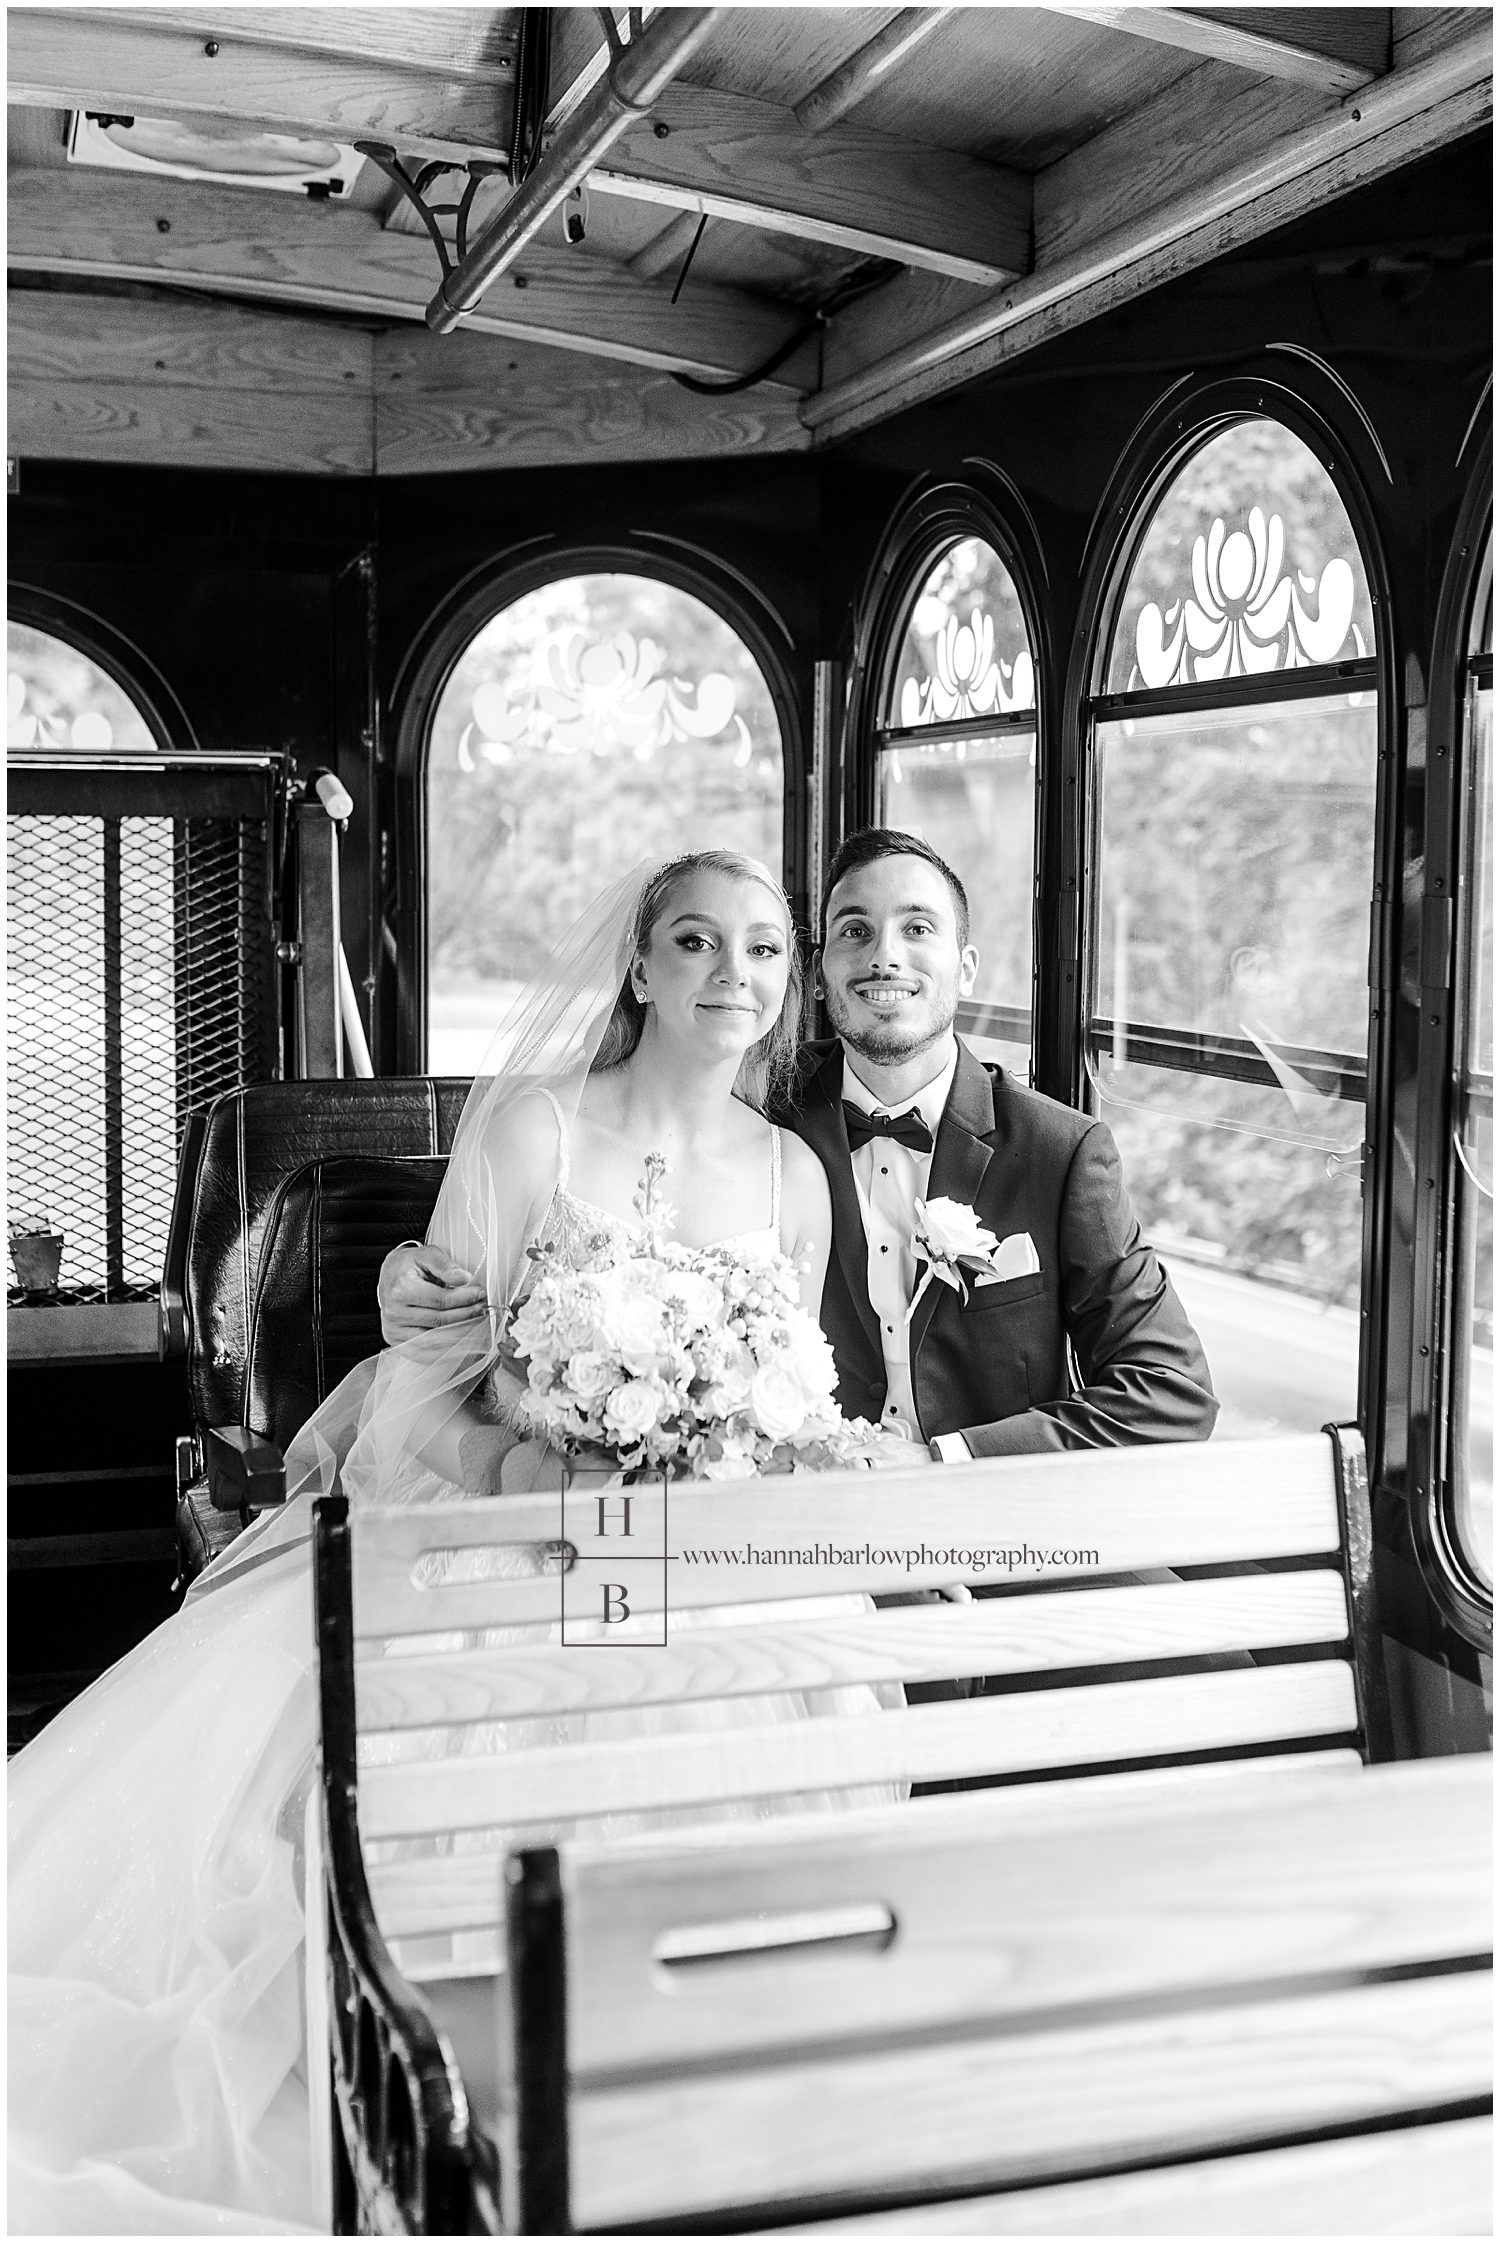 Bride and groom pose in trolley.